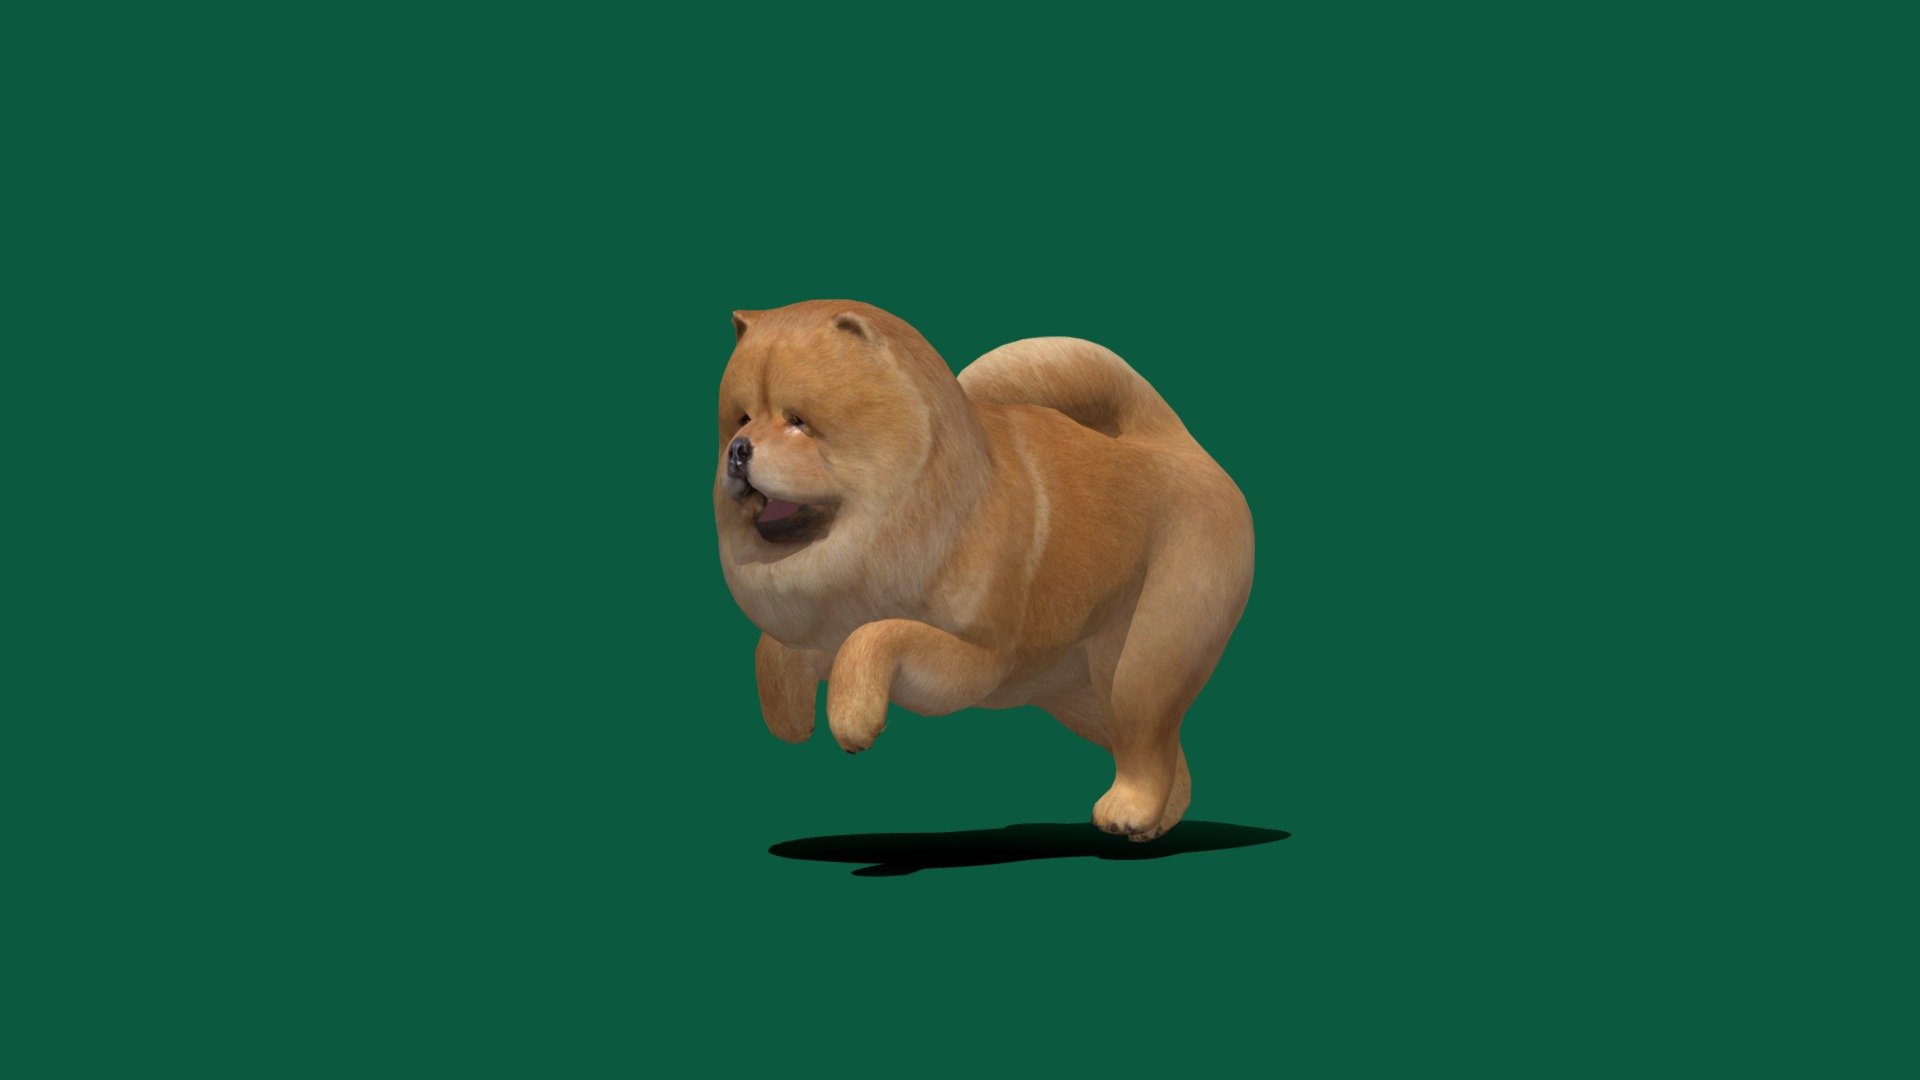 Chow Chow Dog Game Ready Lowpoly
4K PBR Material Textures
Diffuse ,Metallic ,Roughness,Spectular Tint, Normal Map.
5 Animations 


The Chow Chow is a spitz-type of dog breed originally from northern China. The Chow Chow is a sturdily built dog, square in profile, with a broad skull and small, triangular, erect ears with rounded tips. The breed is known for a very dense double coat that is either smooth or rough. Wikipedia
Temperament: Aloof, Loyal, Independent, Quiet
Life span: 9 – 15 years
Colors: Black, Blue, Fawn, Cream, Red
Height: Male: 48–56 cm, Female: 46–51 cm
Origin: China
Weight: Male: 25–32 kg, Female: 20–27 kg
China Kennel Union: standard - Chow Chow (LowPoly) - 3D model by Nyilonelycompany 3d model